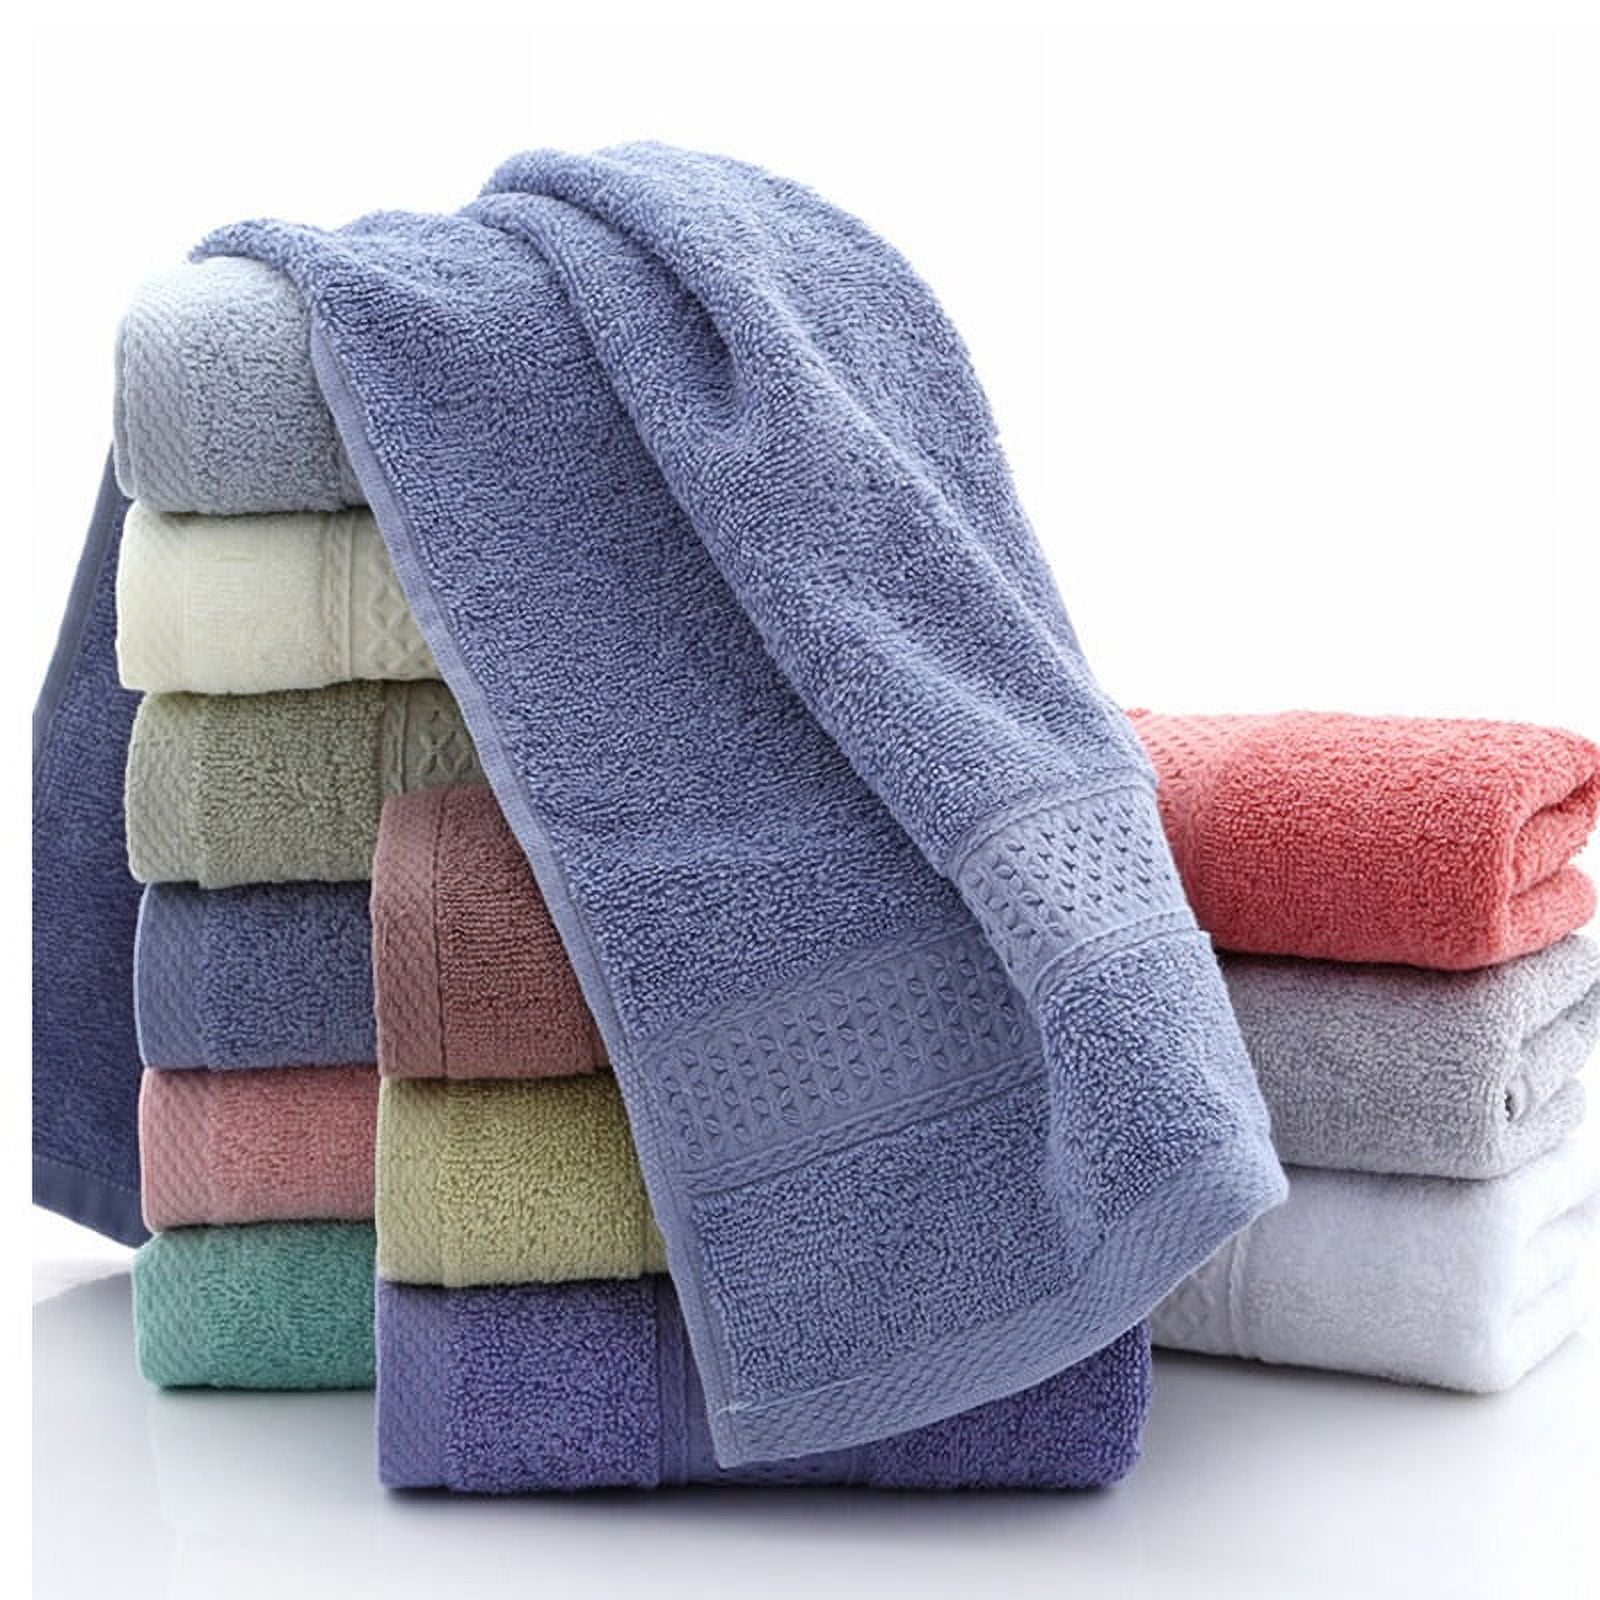 Greatcall Japan Face Towel Set - Microfiber Quick Drying Soft & Fluffy